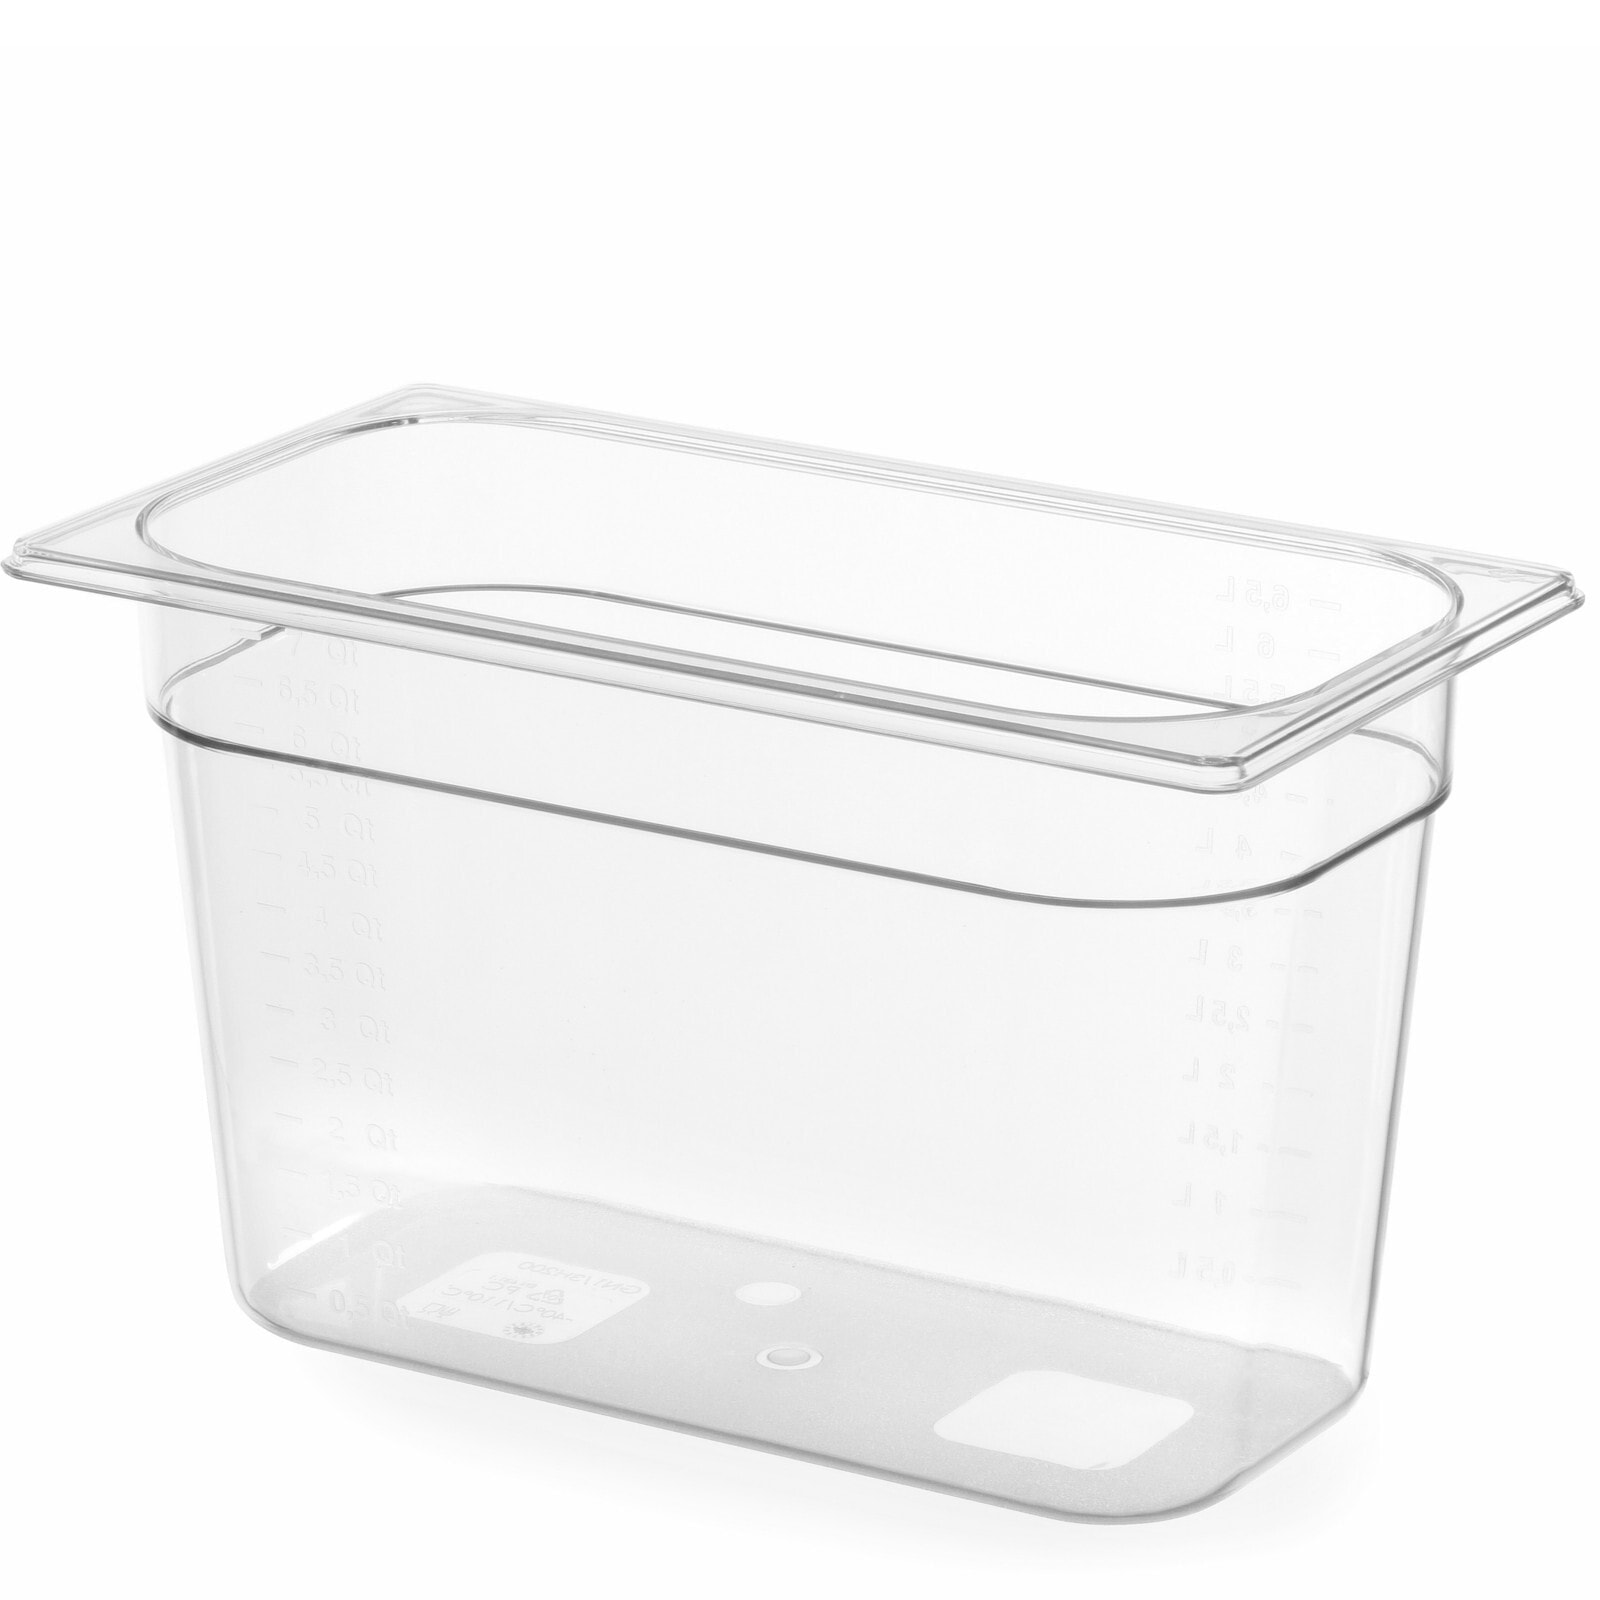 Transparent GN container made of polycarbonate GN 1/3, height 100 mm - Hendi 861523